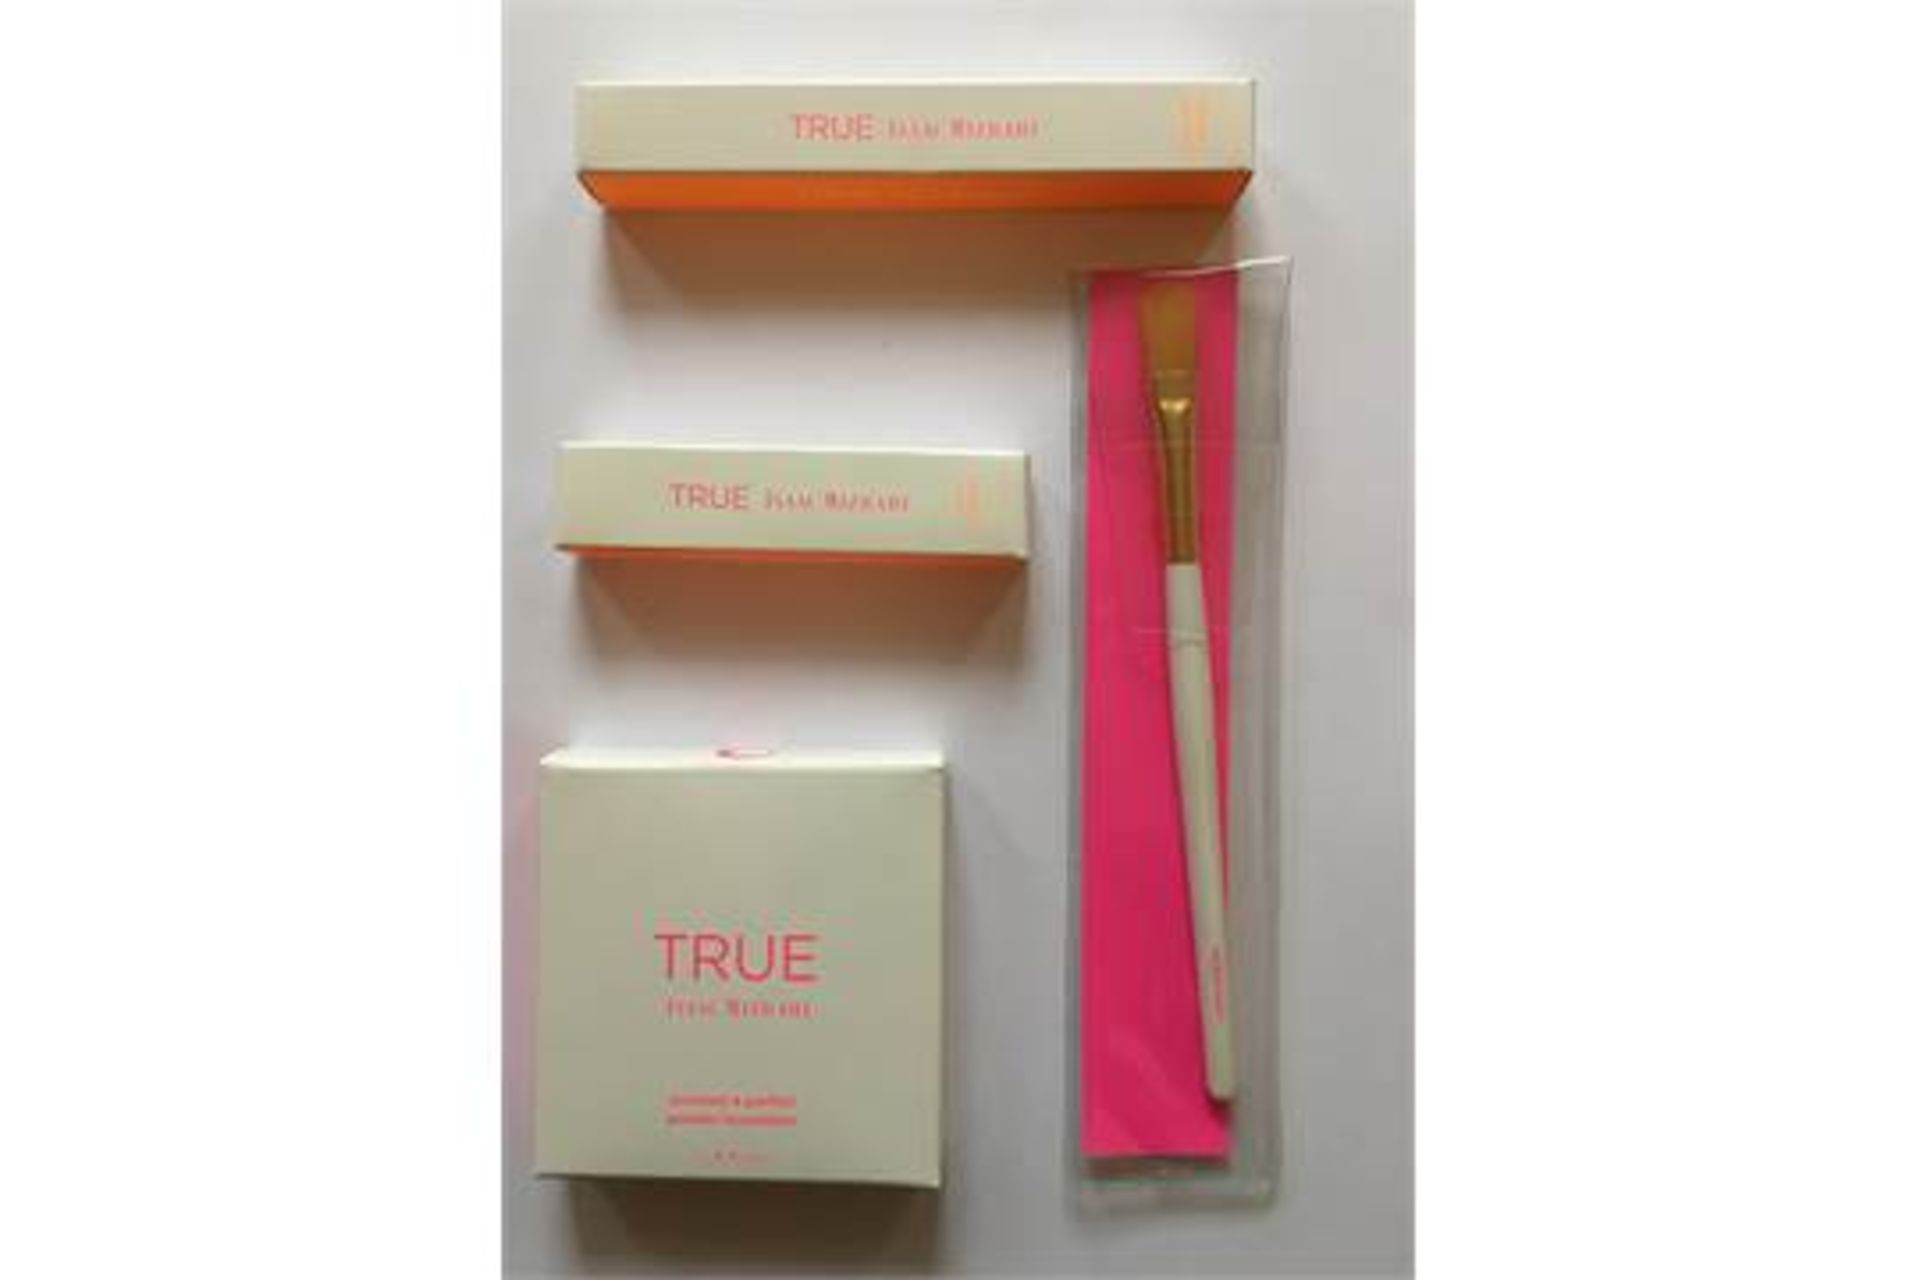 100 x True by Issac Mizrahi – 4 Item Gift Set – RRP £60 per set Each set is individually packed in a